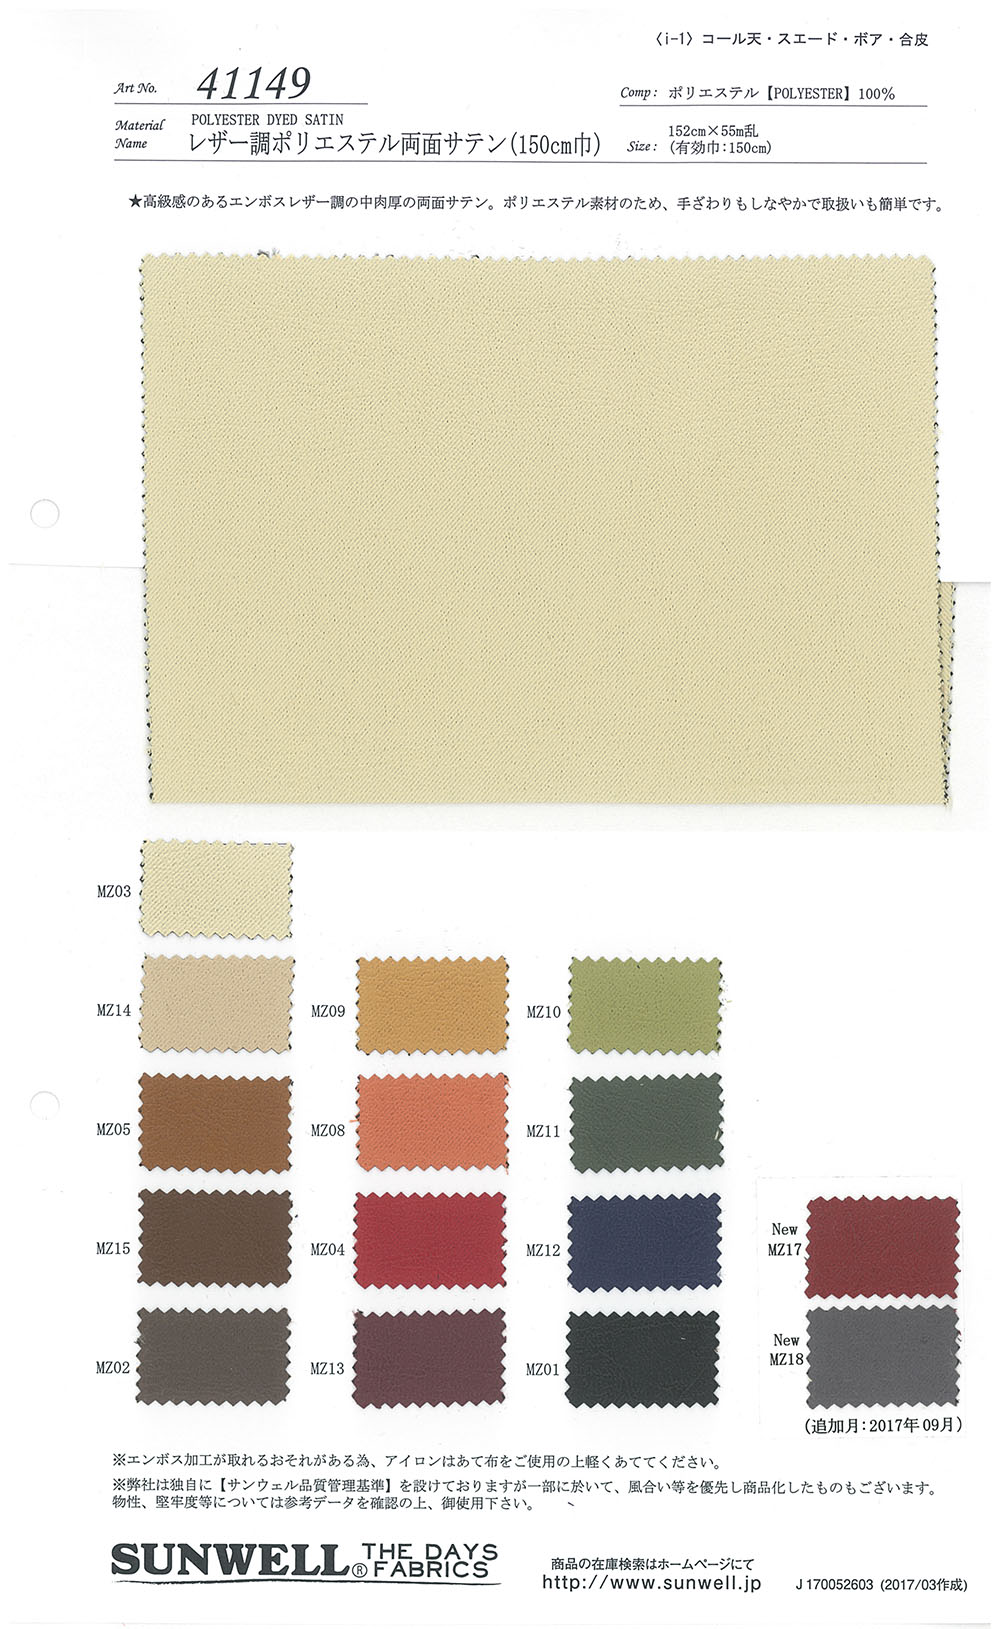 41149 Leather-like Polyester Double-sided Satin (150cm Width)[Textile / Fabric] SUNWELL